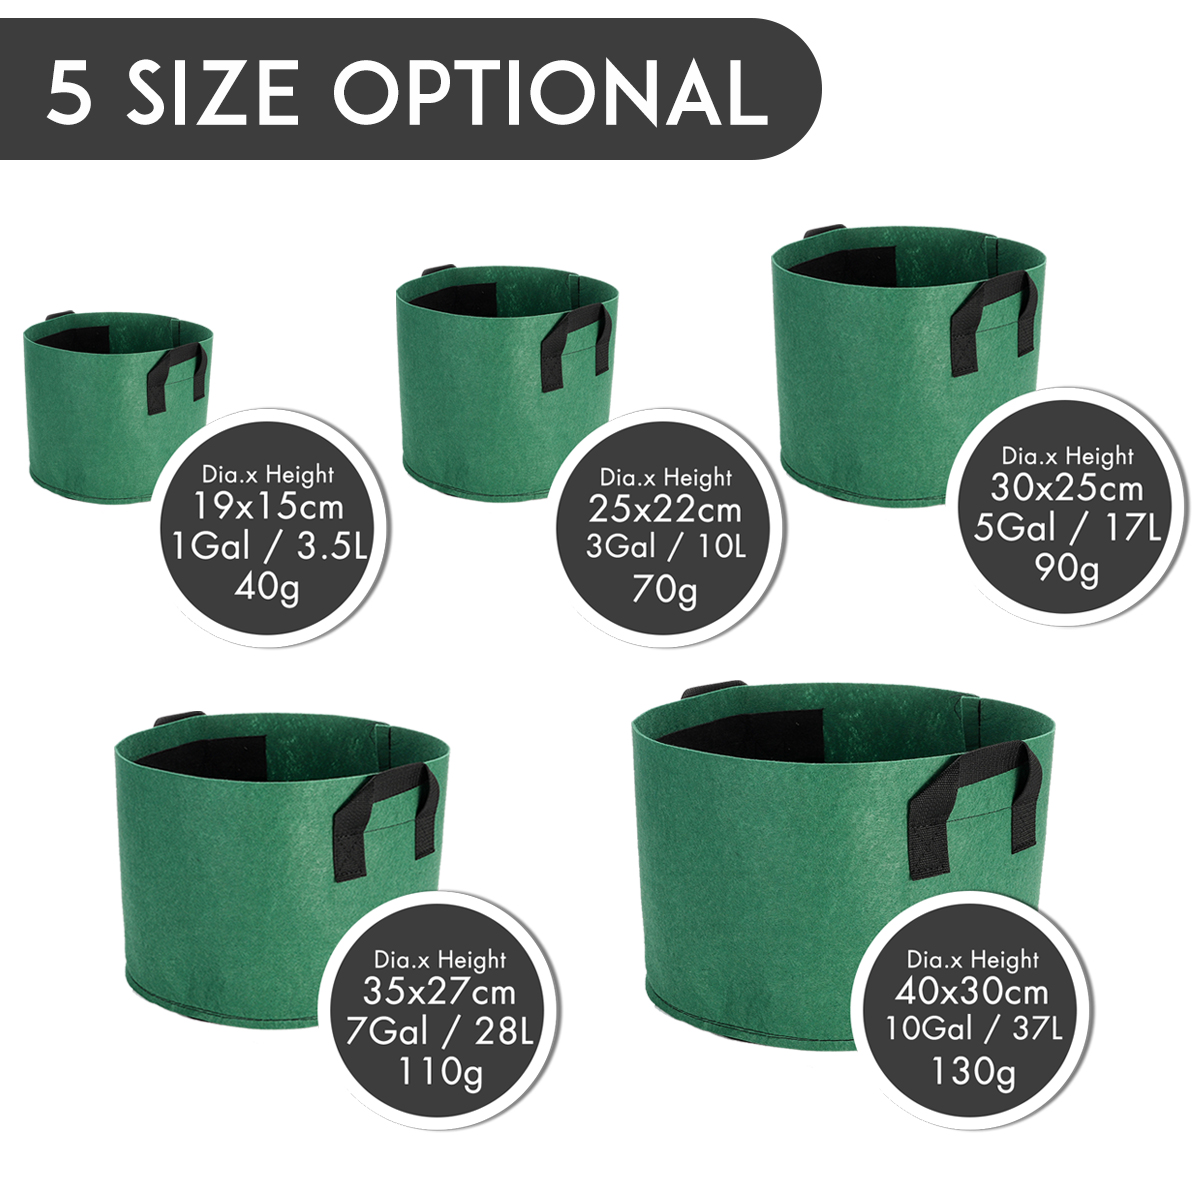 1235710Gallon-Felt-Non-Woven-Pots-Plant-Grow-Bag-Planting-Pouch-Container-Nursery-Seedling-Planting--1543442-4